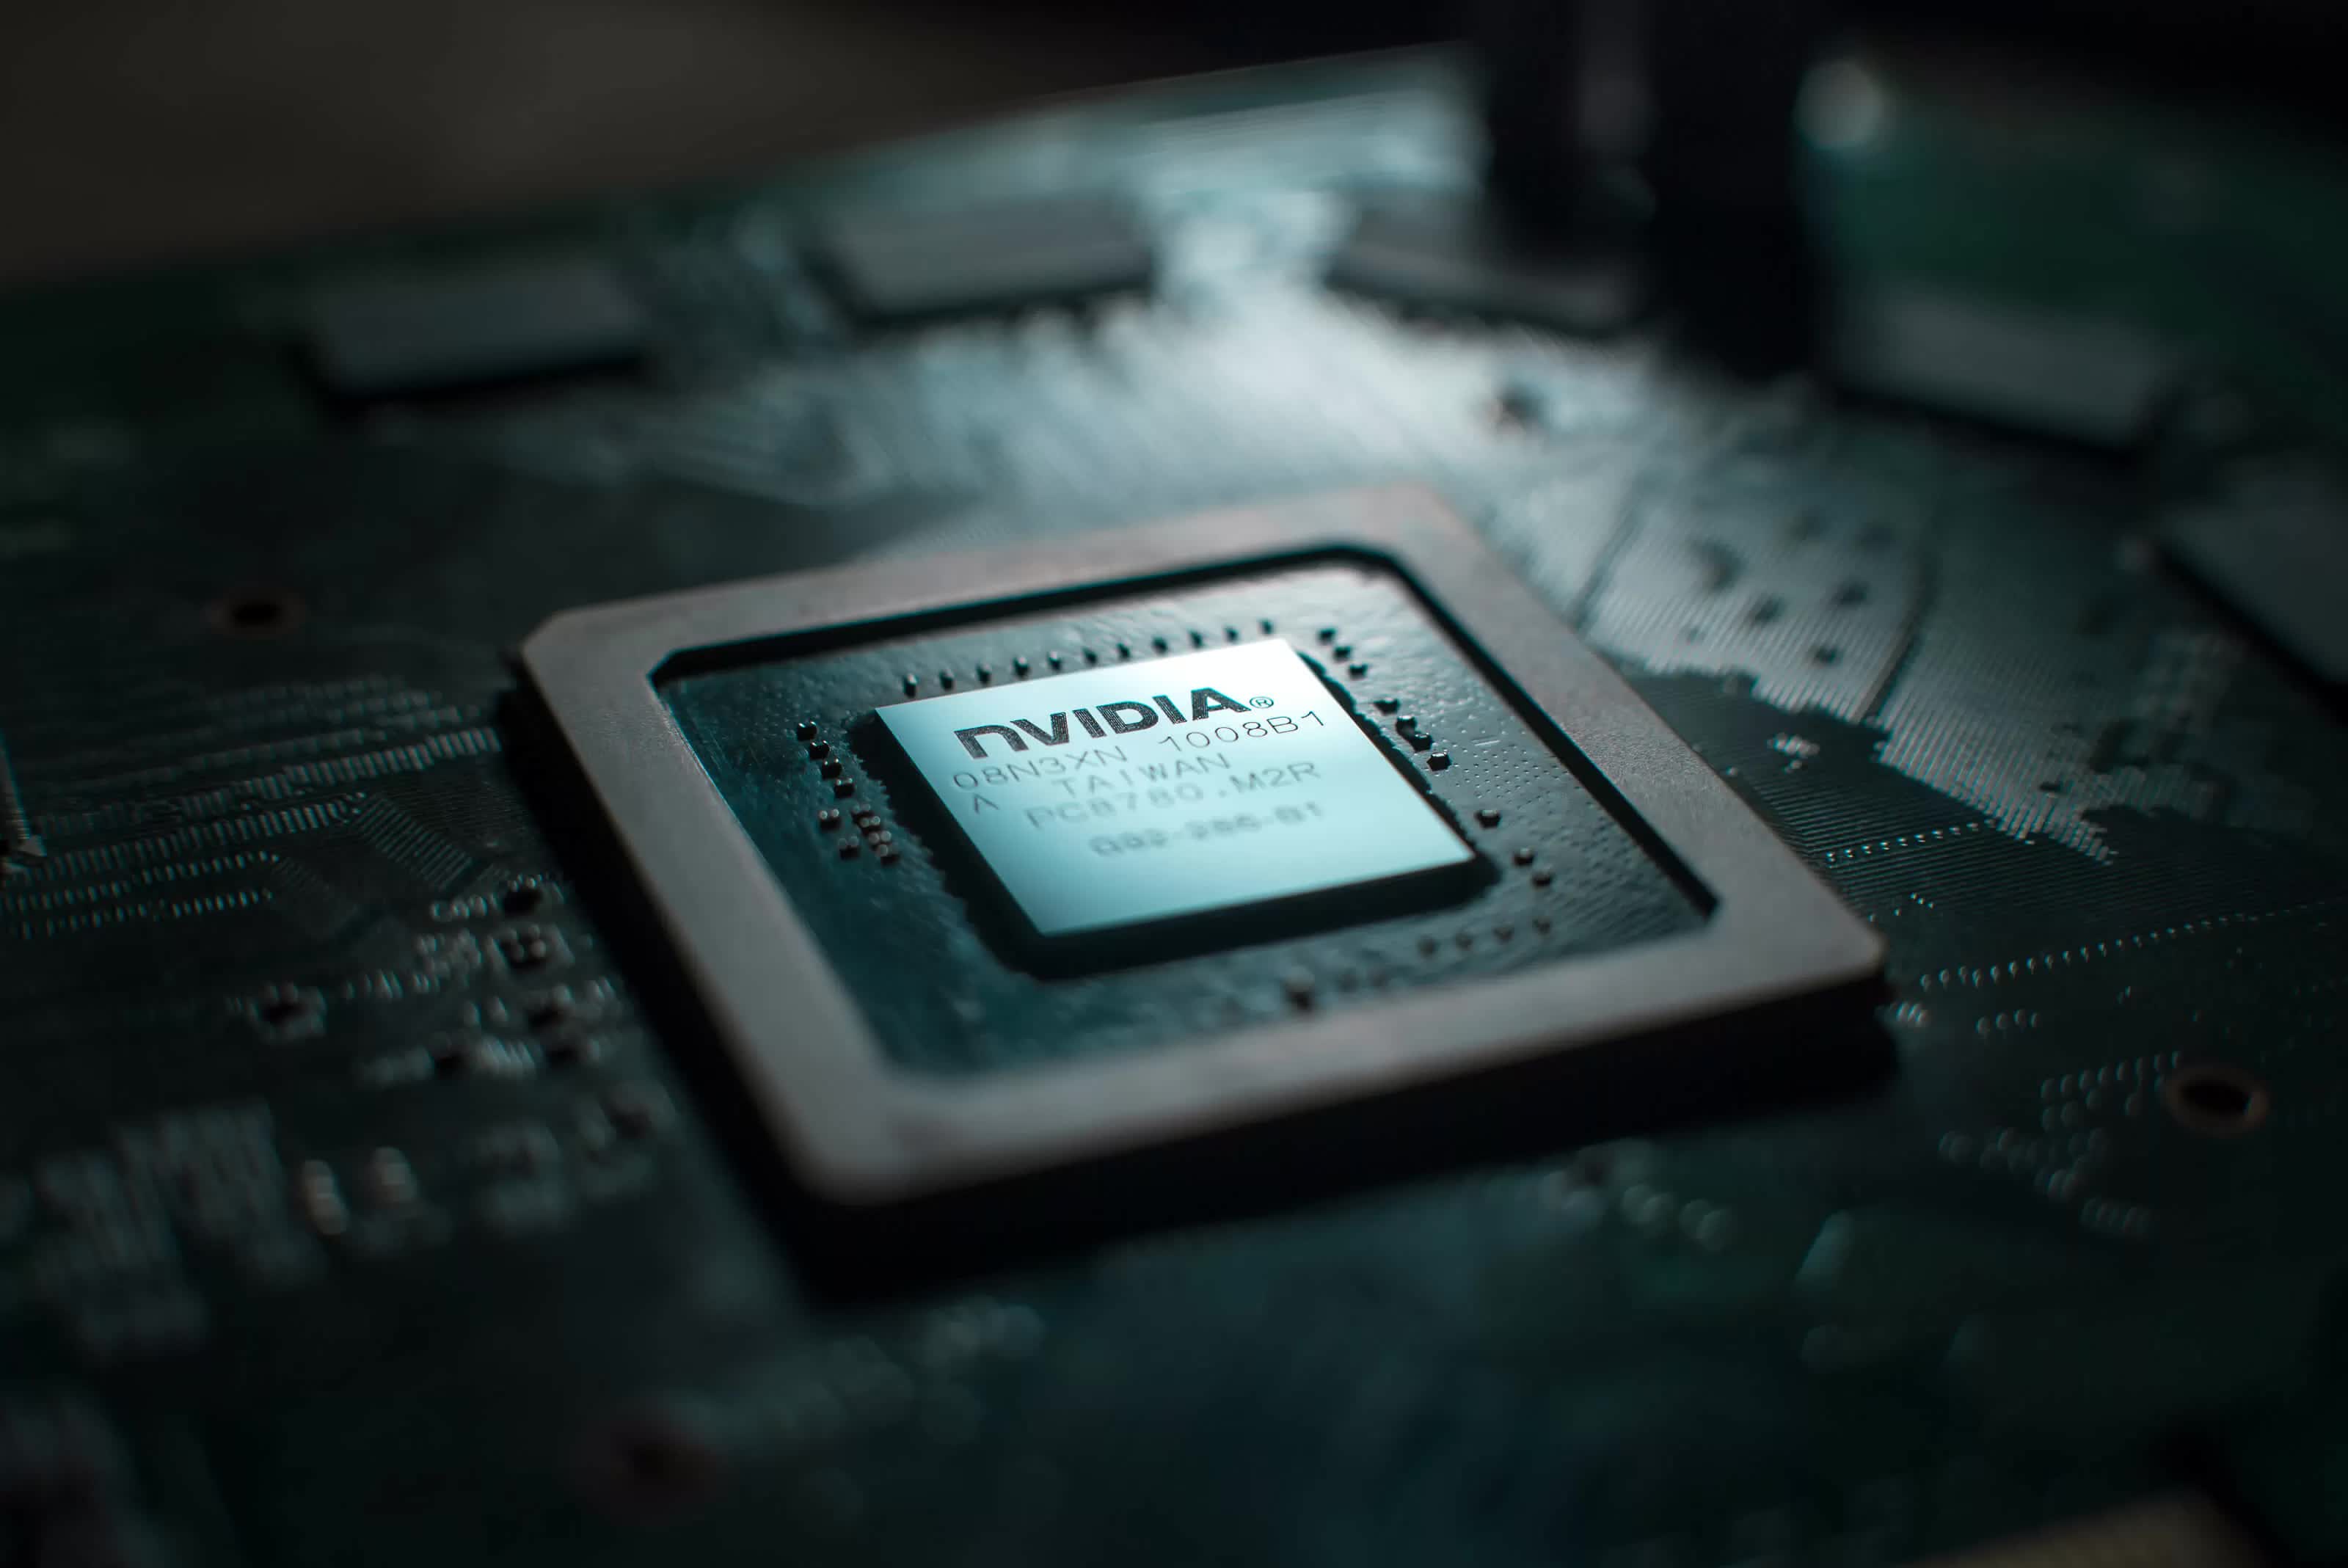 Qualcomm, Google, and Microsoft aren't happy about Nvidia buying Arm